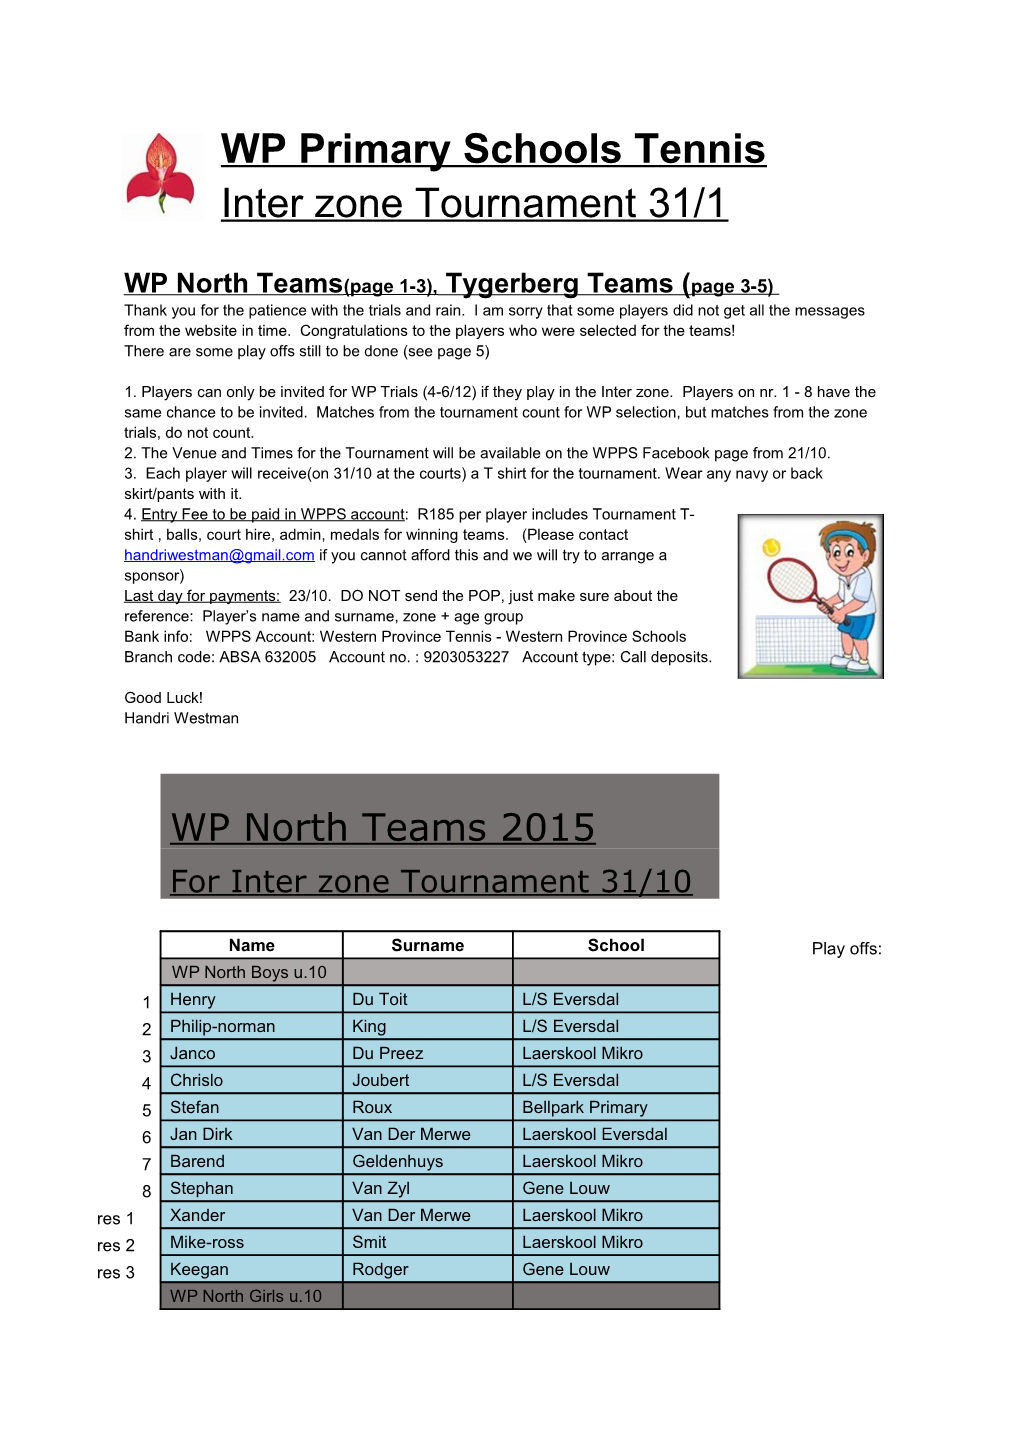 WP Primary Schools Tennis Inter Zone Tournament 31/1 WP North Teams(Page 1-3), Tygerberg